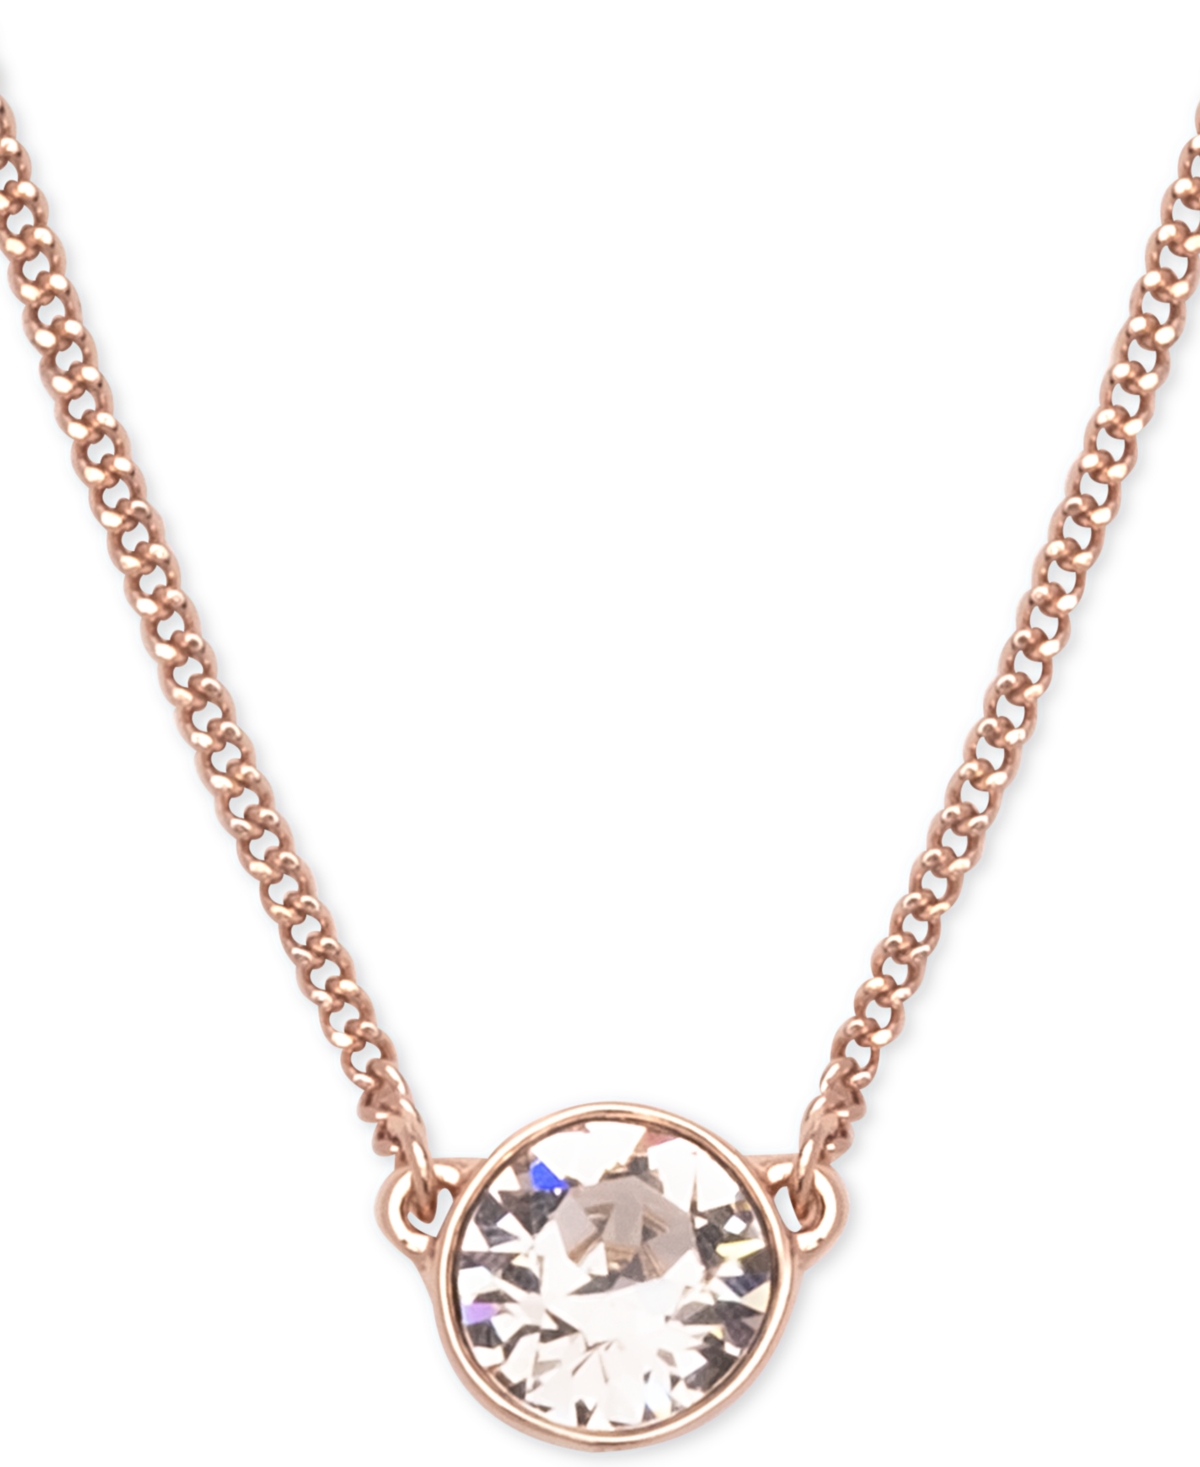 Givenchy, Crystal Pendant Necklace, 16" + 2" Extender - Gold